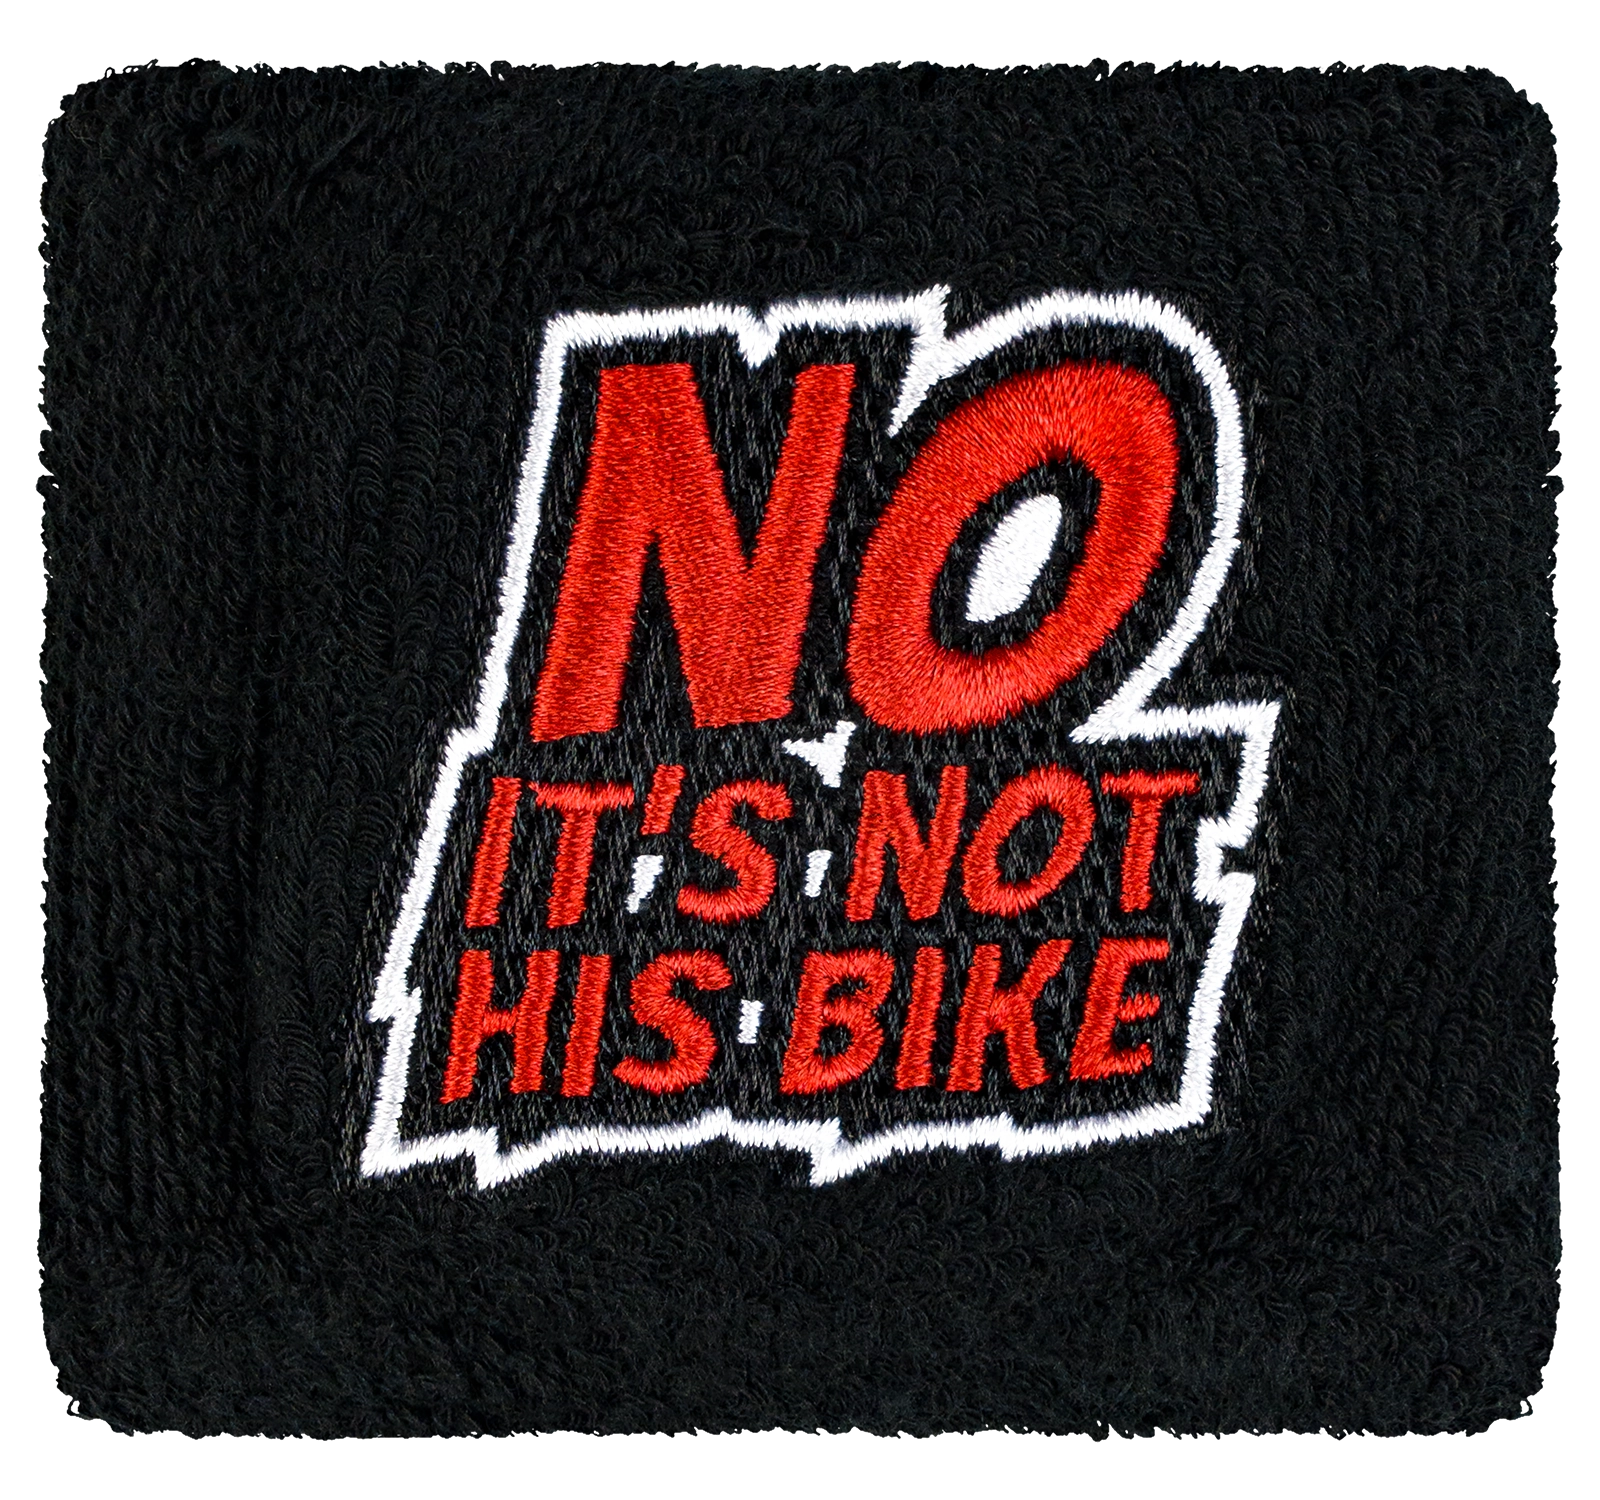 No It's Not His Bike - Reservoir Cover